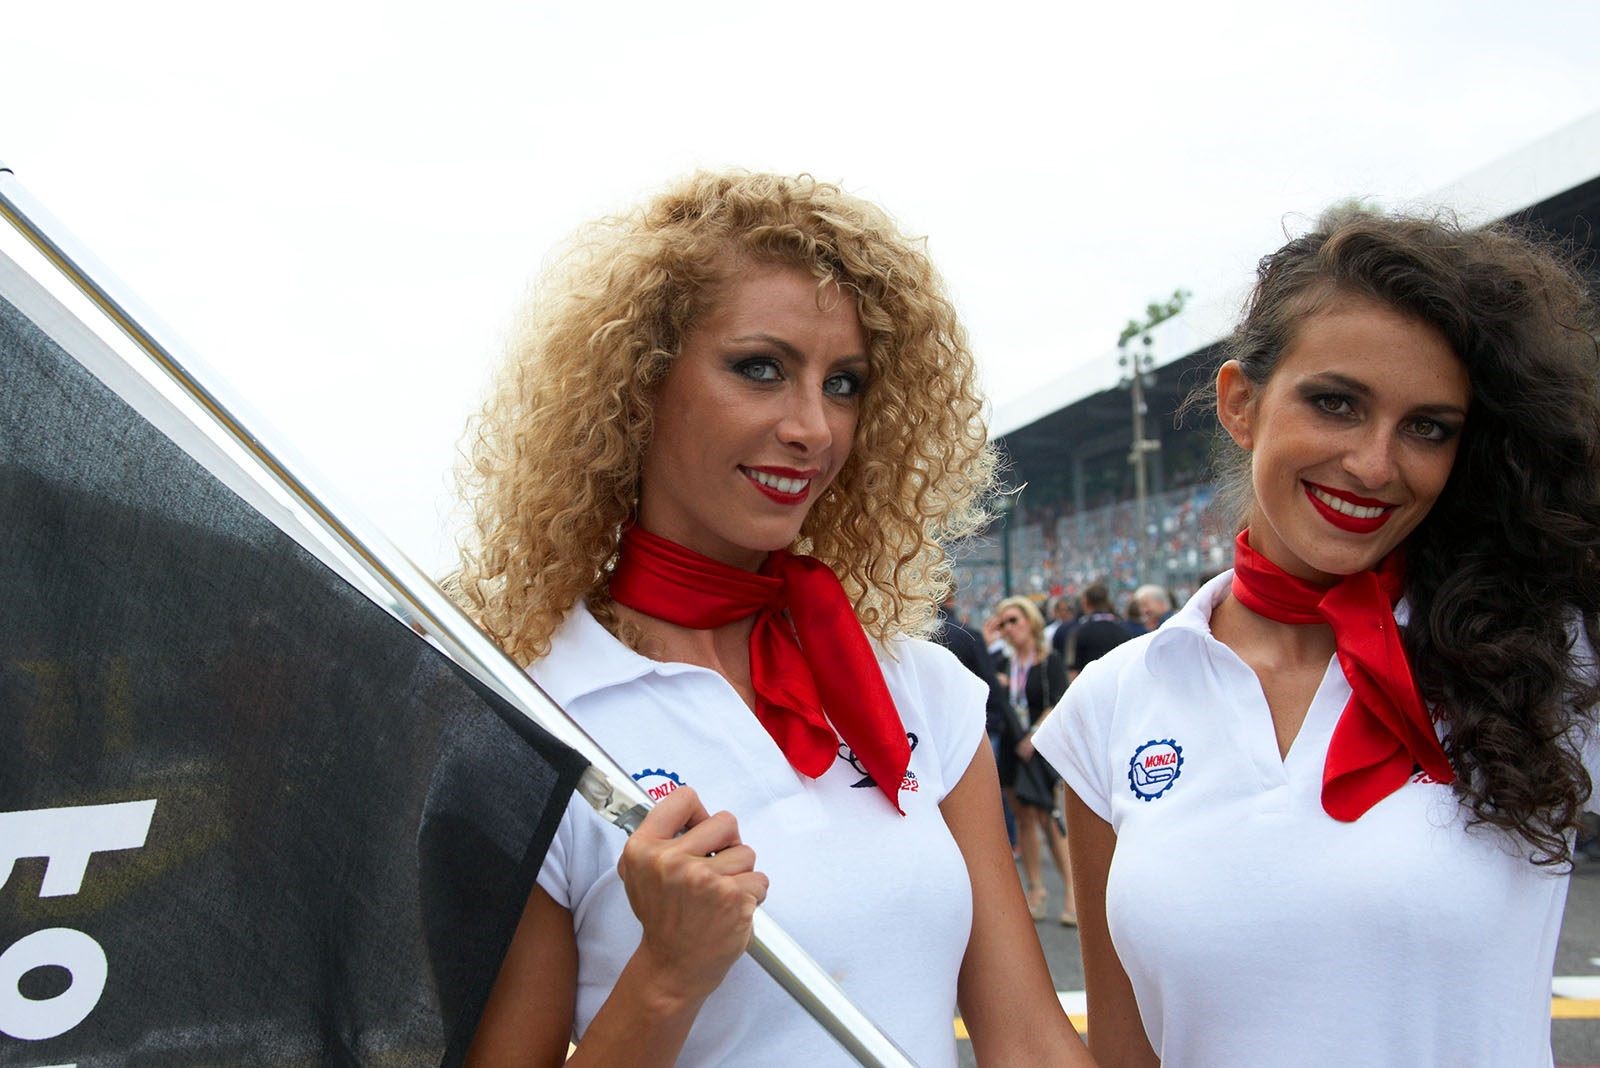 Grid girls at Monza, Italy, in 2013. 